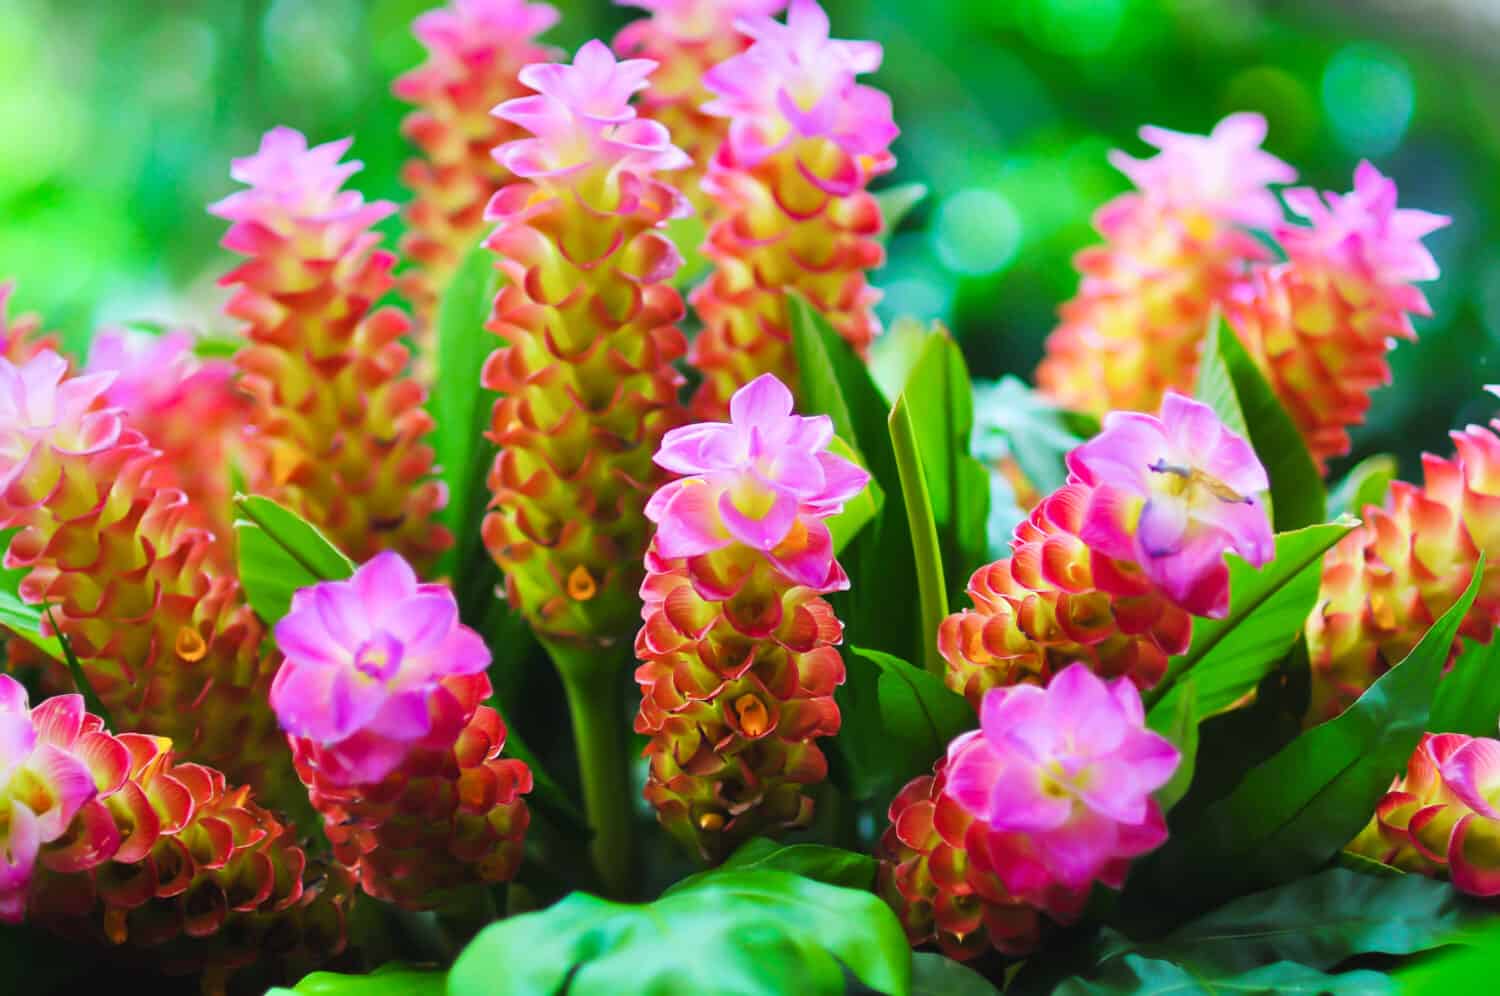 Curcuma petiolata known as jewel of Thailand, Siam tulip, pastel hidden ginger, hidden lily or queen lily, is a plant of the Zingiberaceae or ginger family. It is native  to Thailand and Malaysia